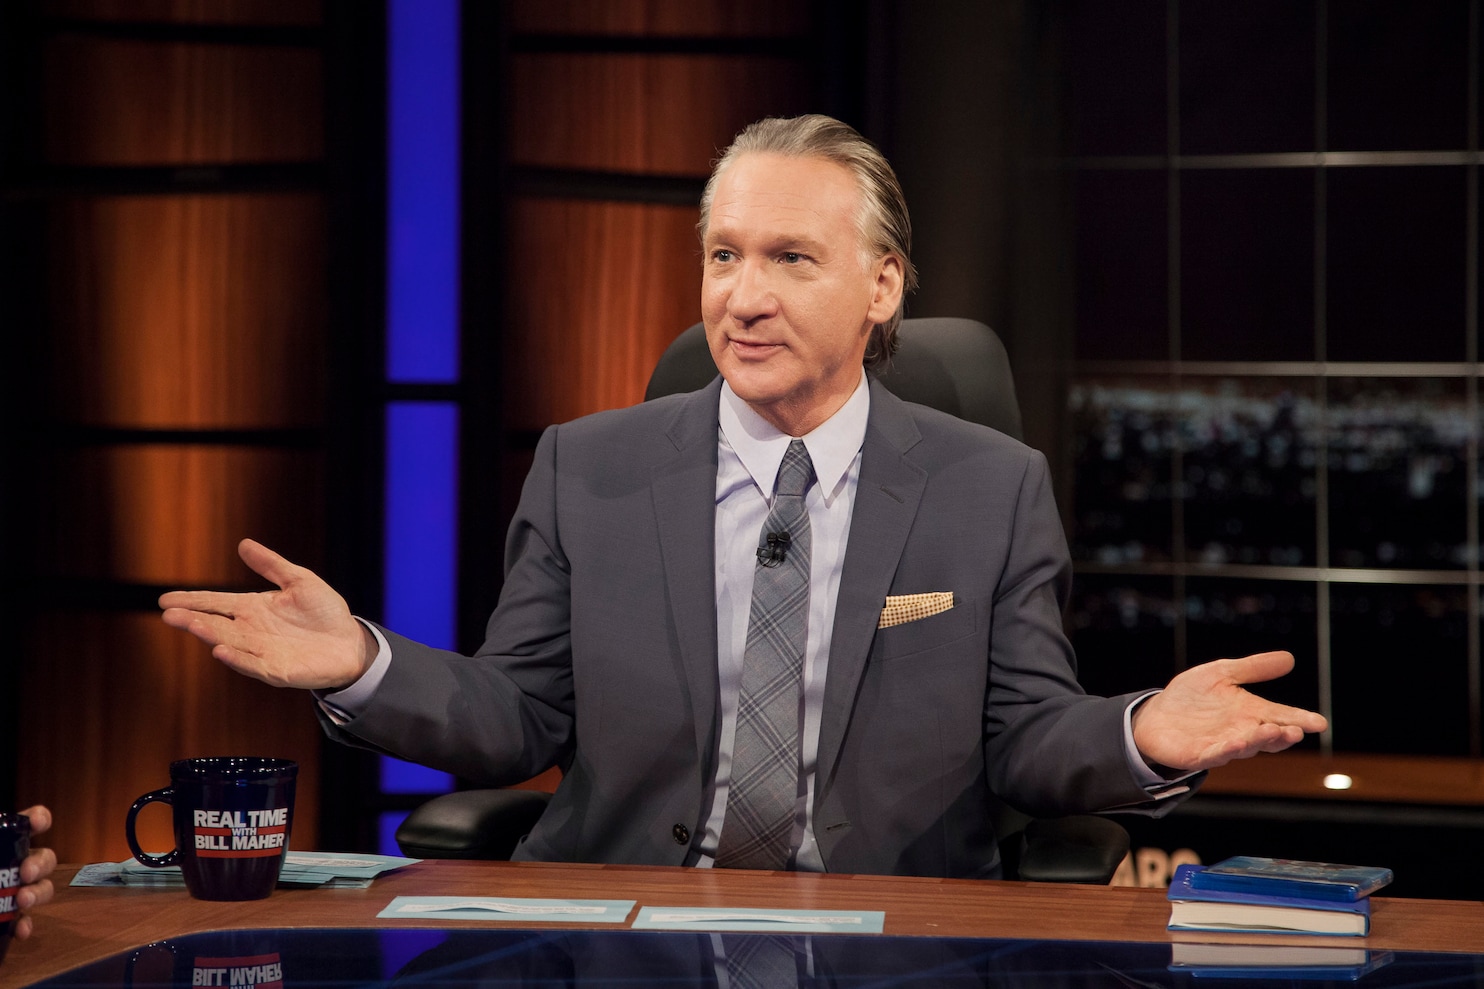 Bill Maher: Trump Getting Indicted Will Make Him a Martyr, But He Must be Held Accountable